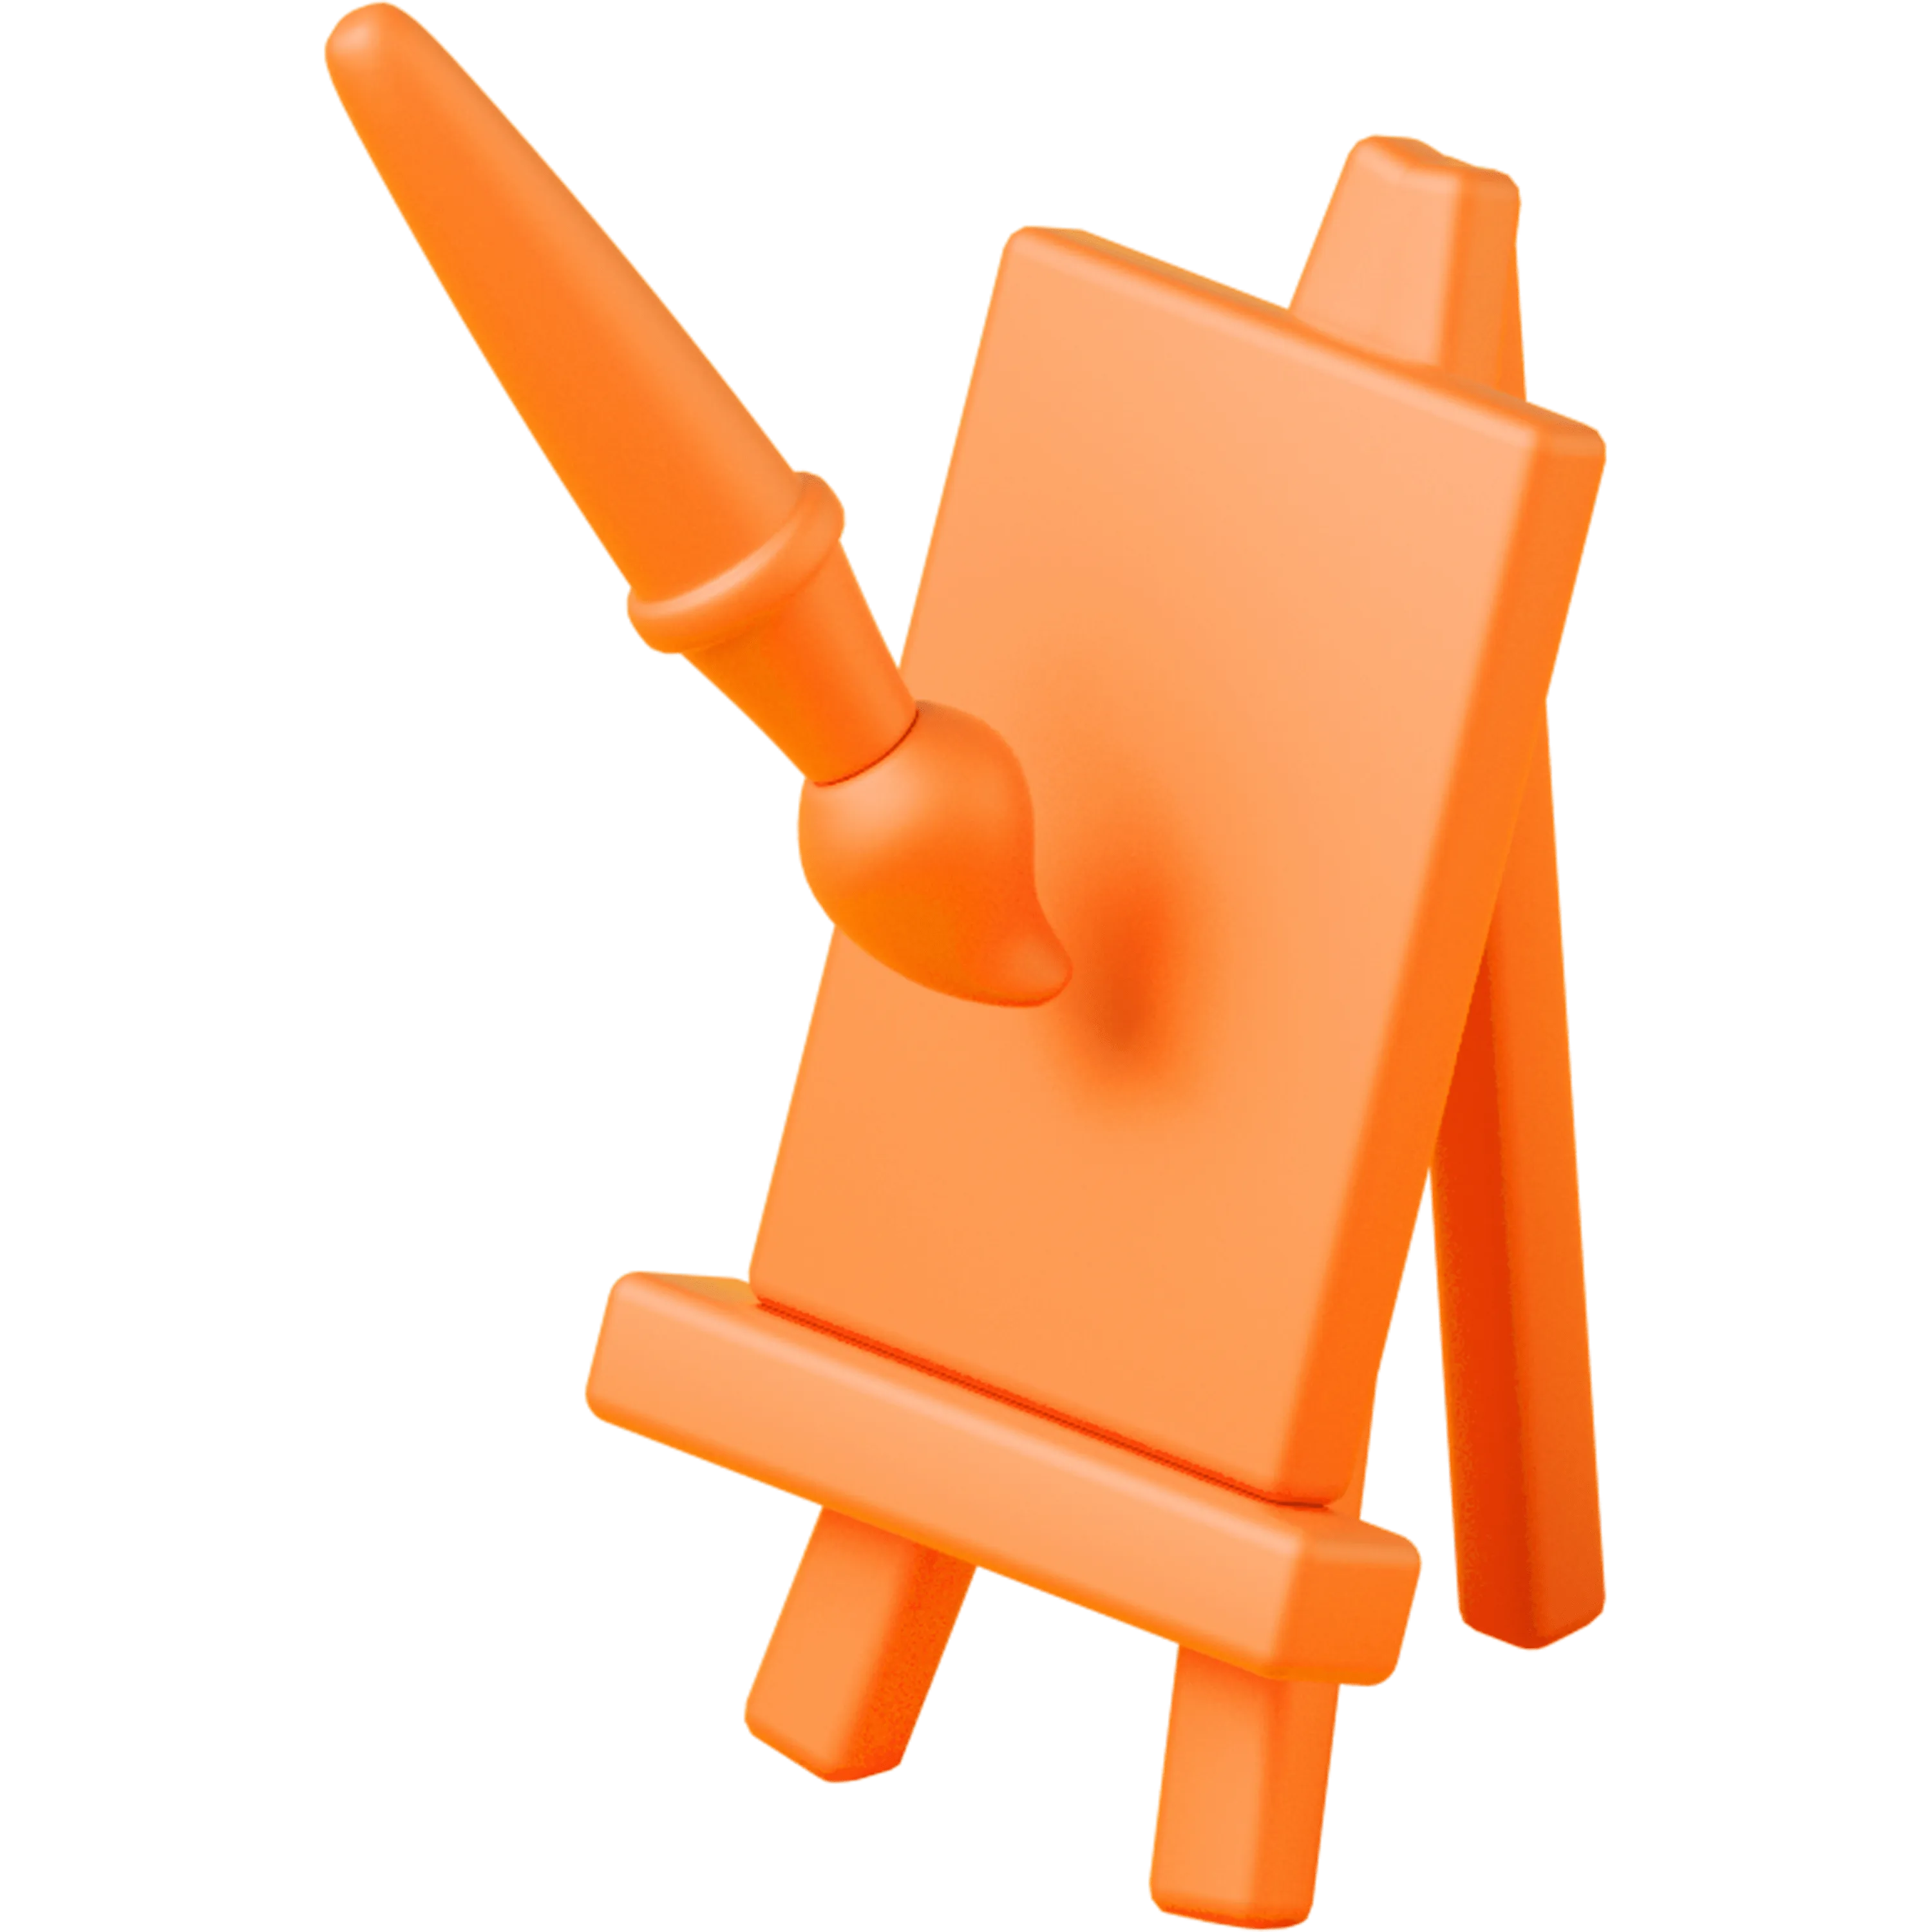 A 3D orange-red easel with paintbrush icon.